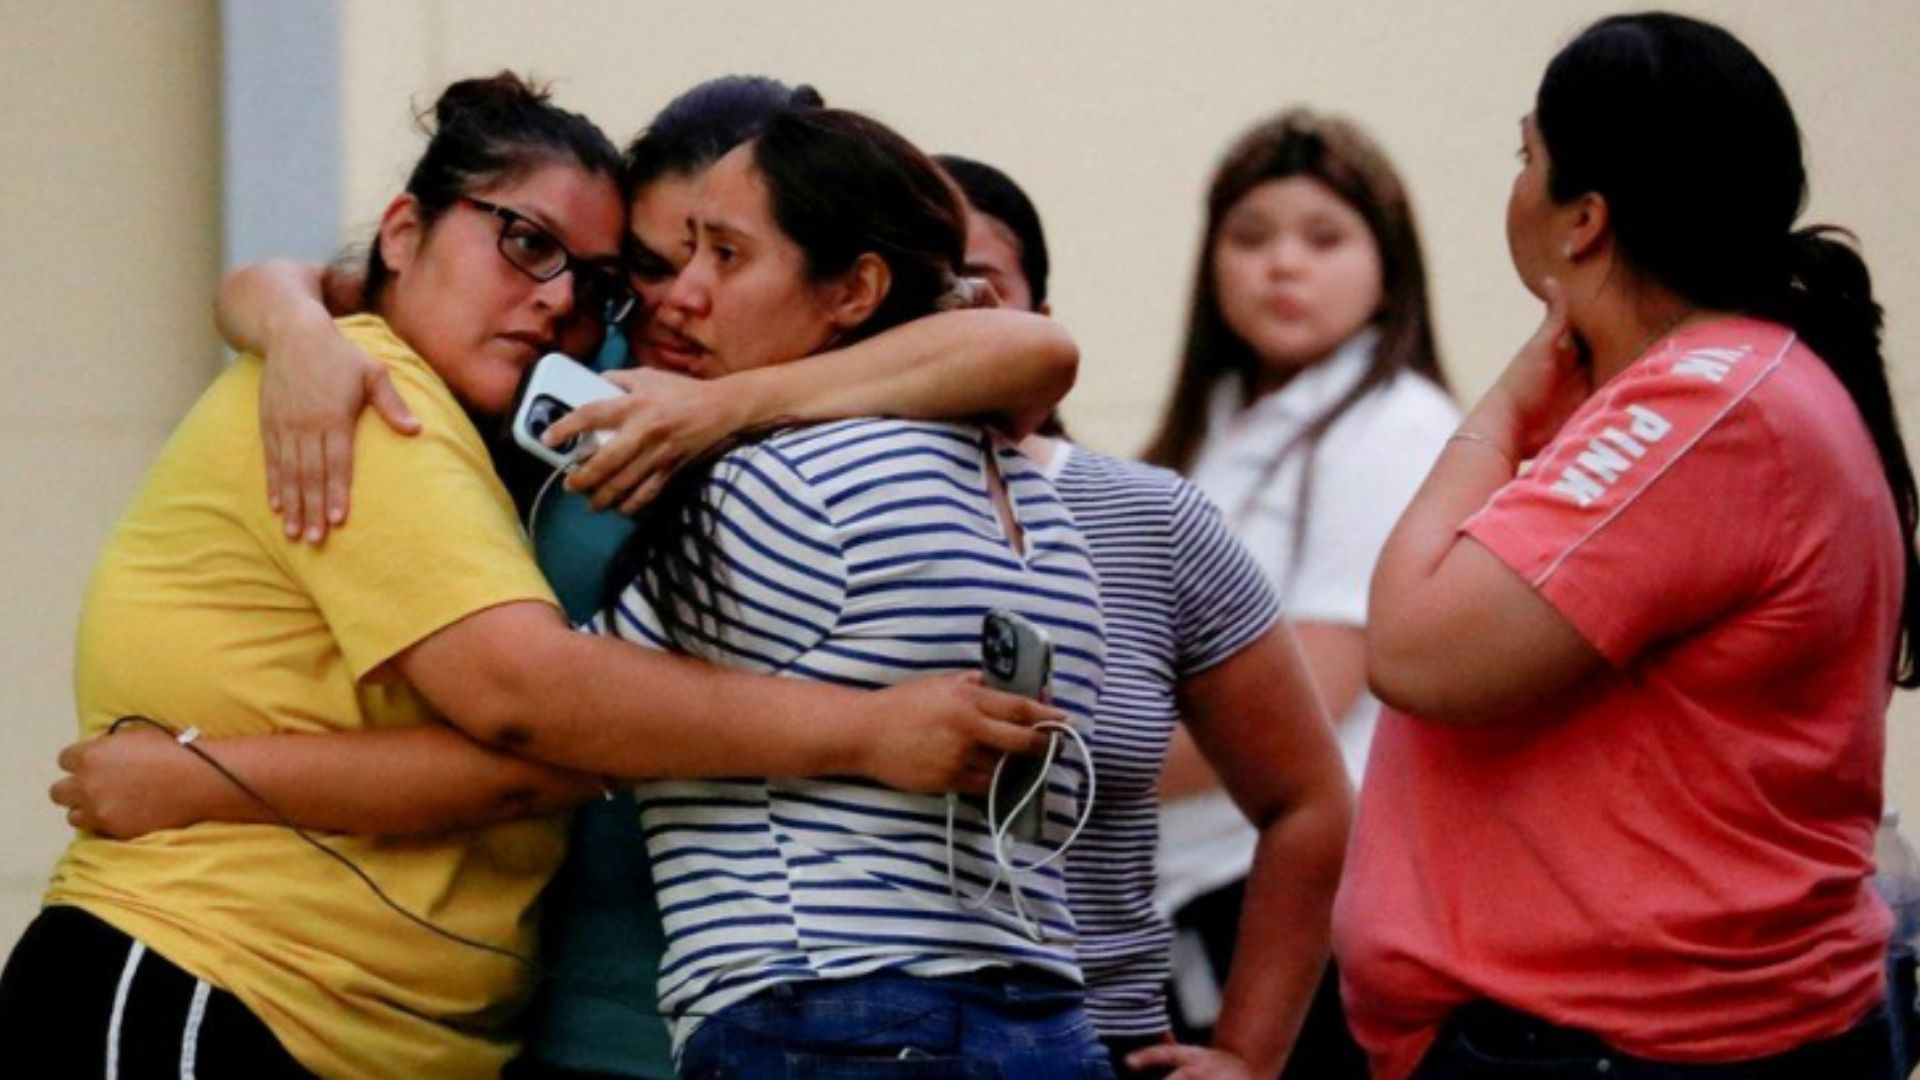 Texas shooting 19 kids among dead in primary school attack